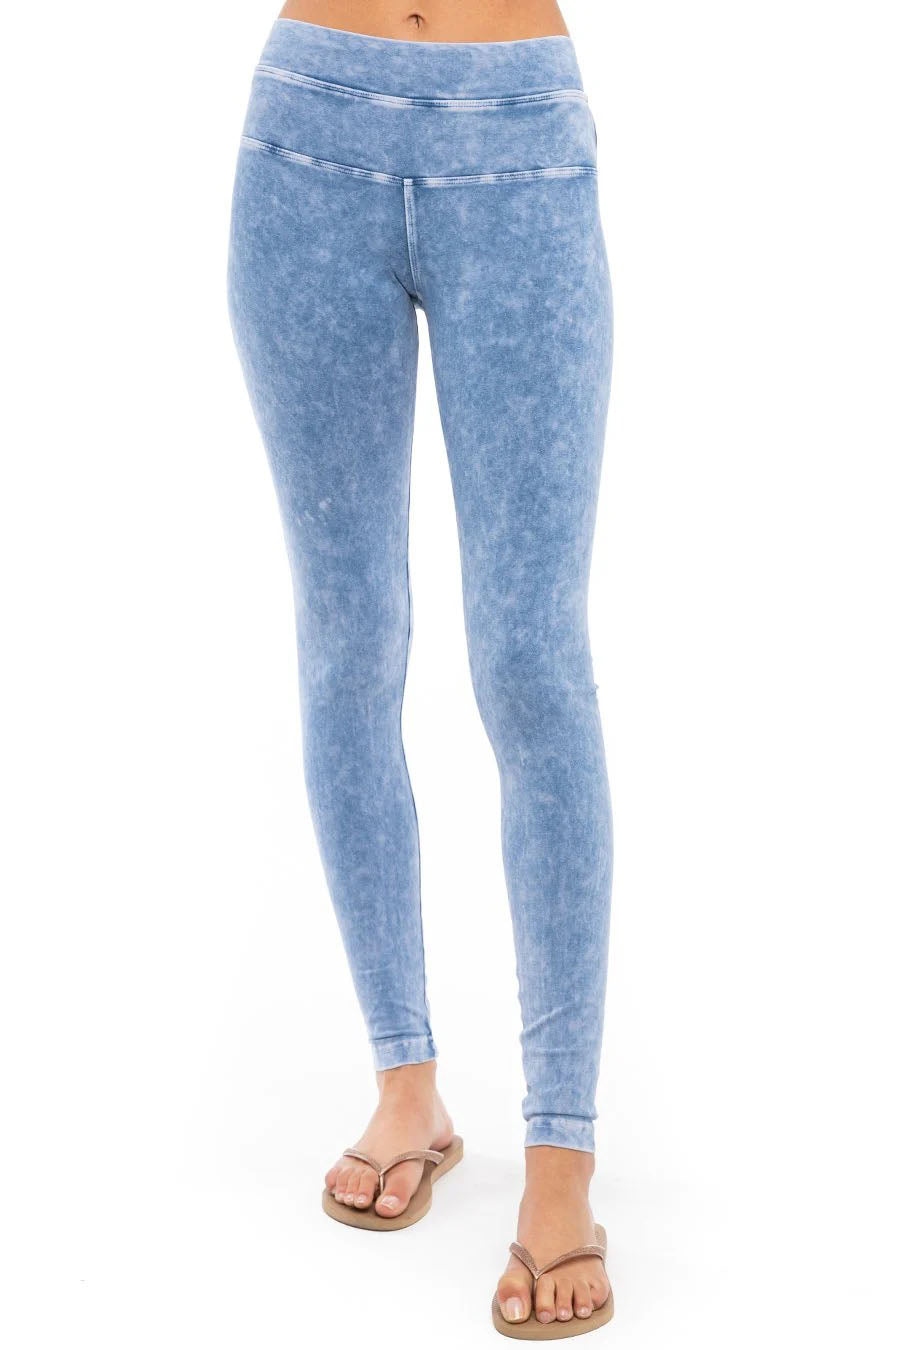 High Rise Ankle Legging (Style W-566, Light Blue Mineral Wash MW7) by Hard Tail Forever